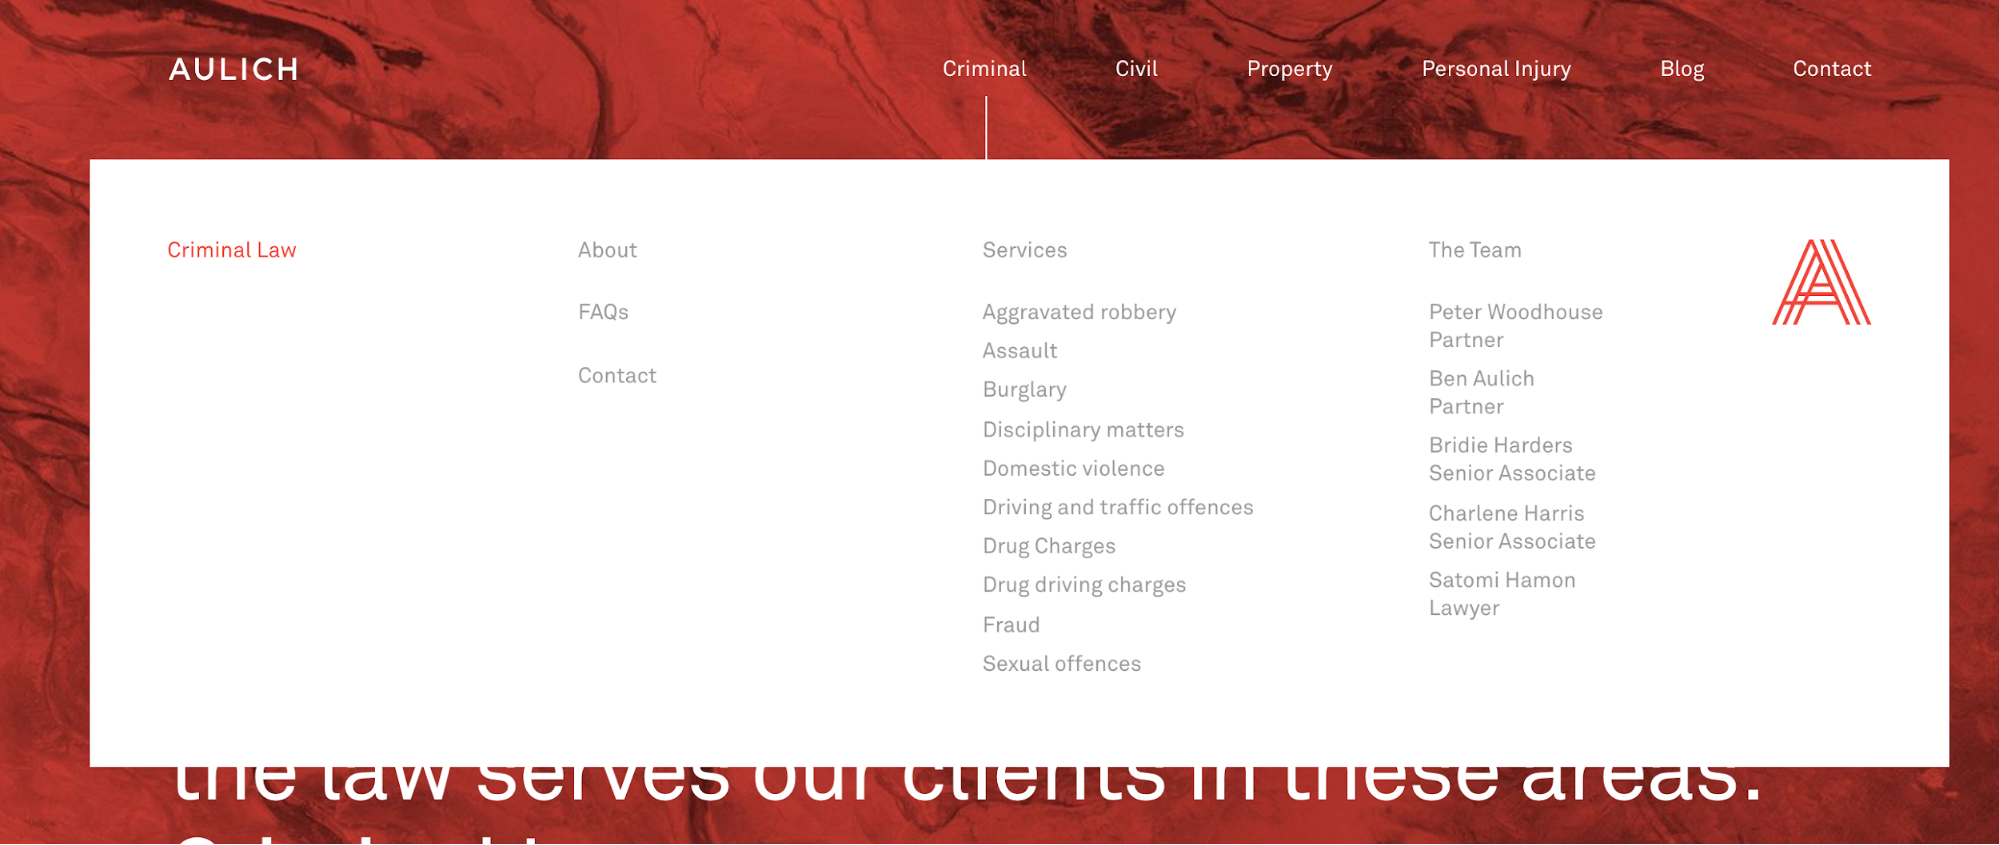 Interactive animated backgrounds make your legal website look professional